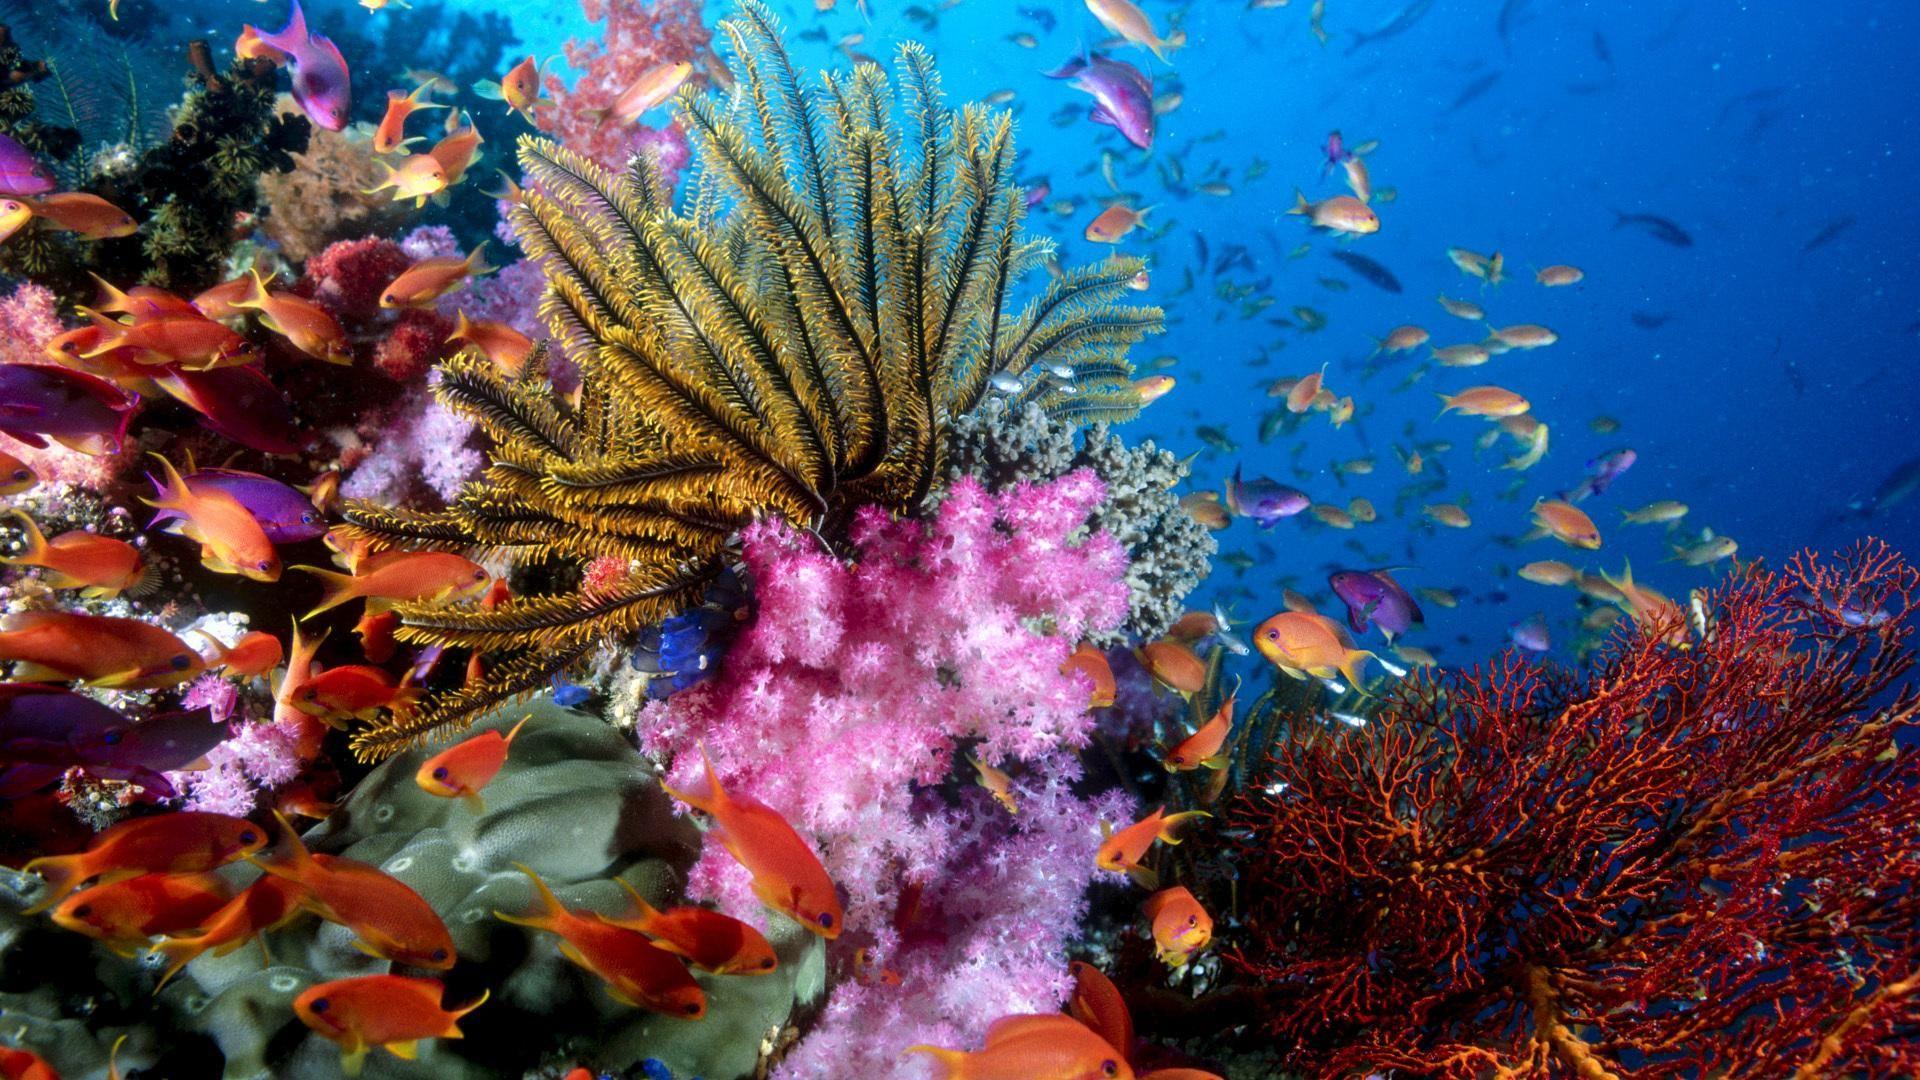 Colorful Coral Reef Wallpaper Mobile #nVF. Coral reef photography